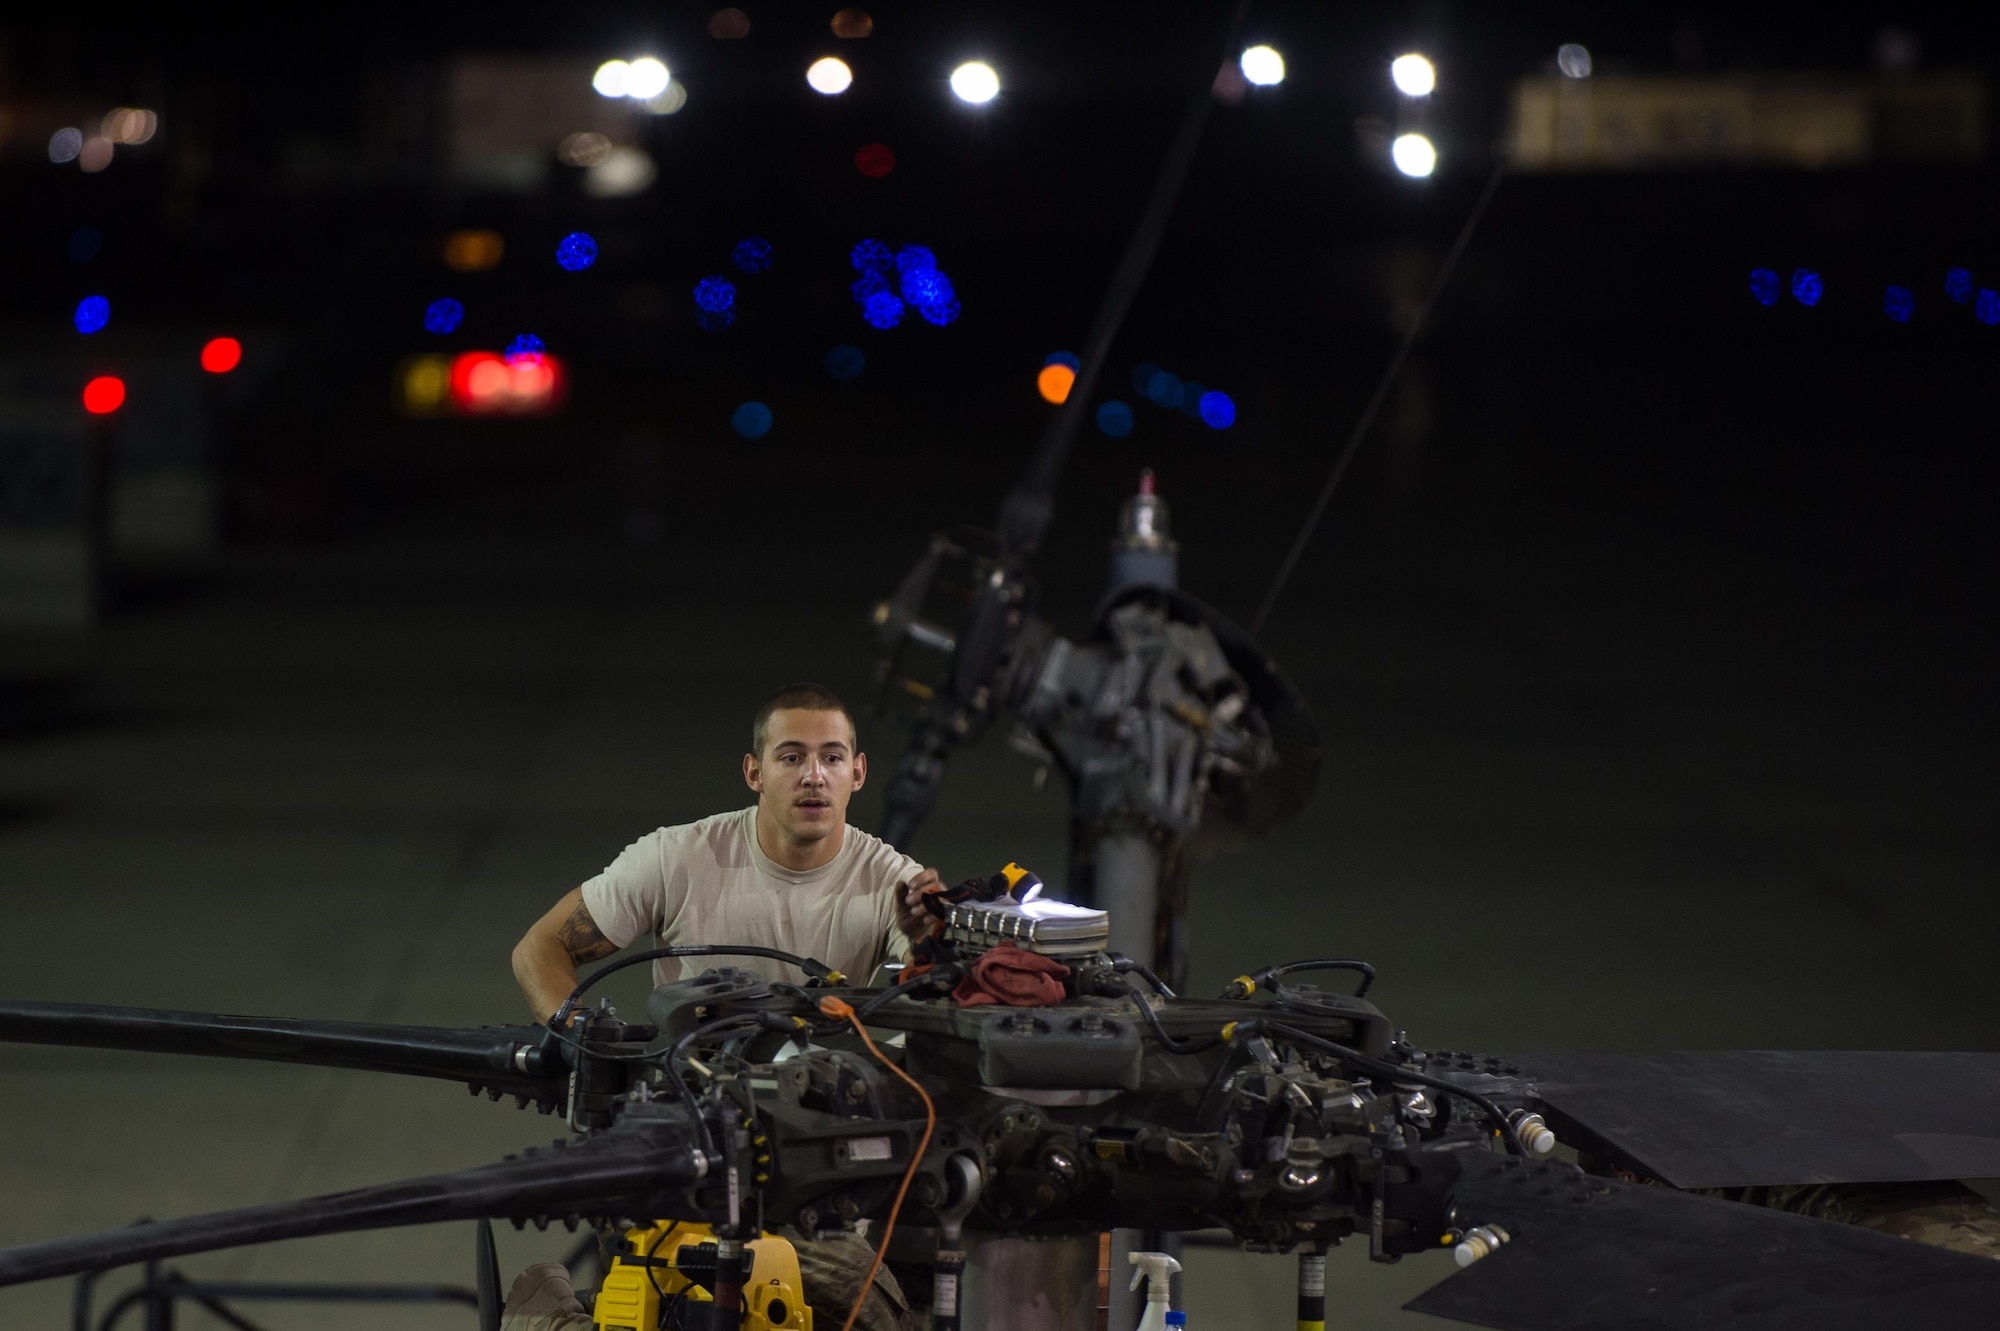 Airman Joshua Herron, a 41st Expeditionary Helicopter Maintenance Unit HH-60 Pave Hawk crew chief, completes a 50-hour inspection on a Pave Hawk at Bagram Airfield, Afghanistan, June 28, 2015. The 41st EHMU ensures Pave Hawks on Bagram Airfield are prepared for flight and returned to a mission-ready state once they land. (U.S. Air Force photo/Tech. Sgt. Joseph Swafford)